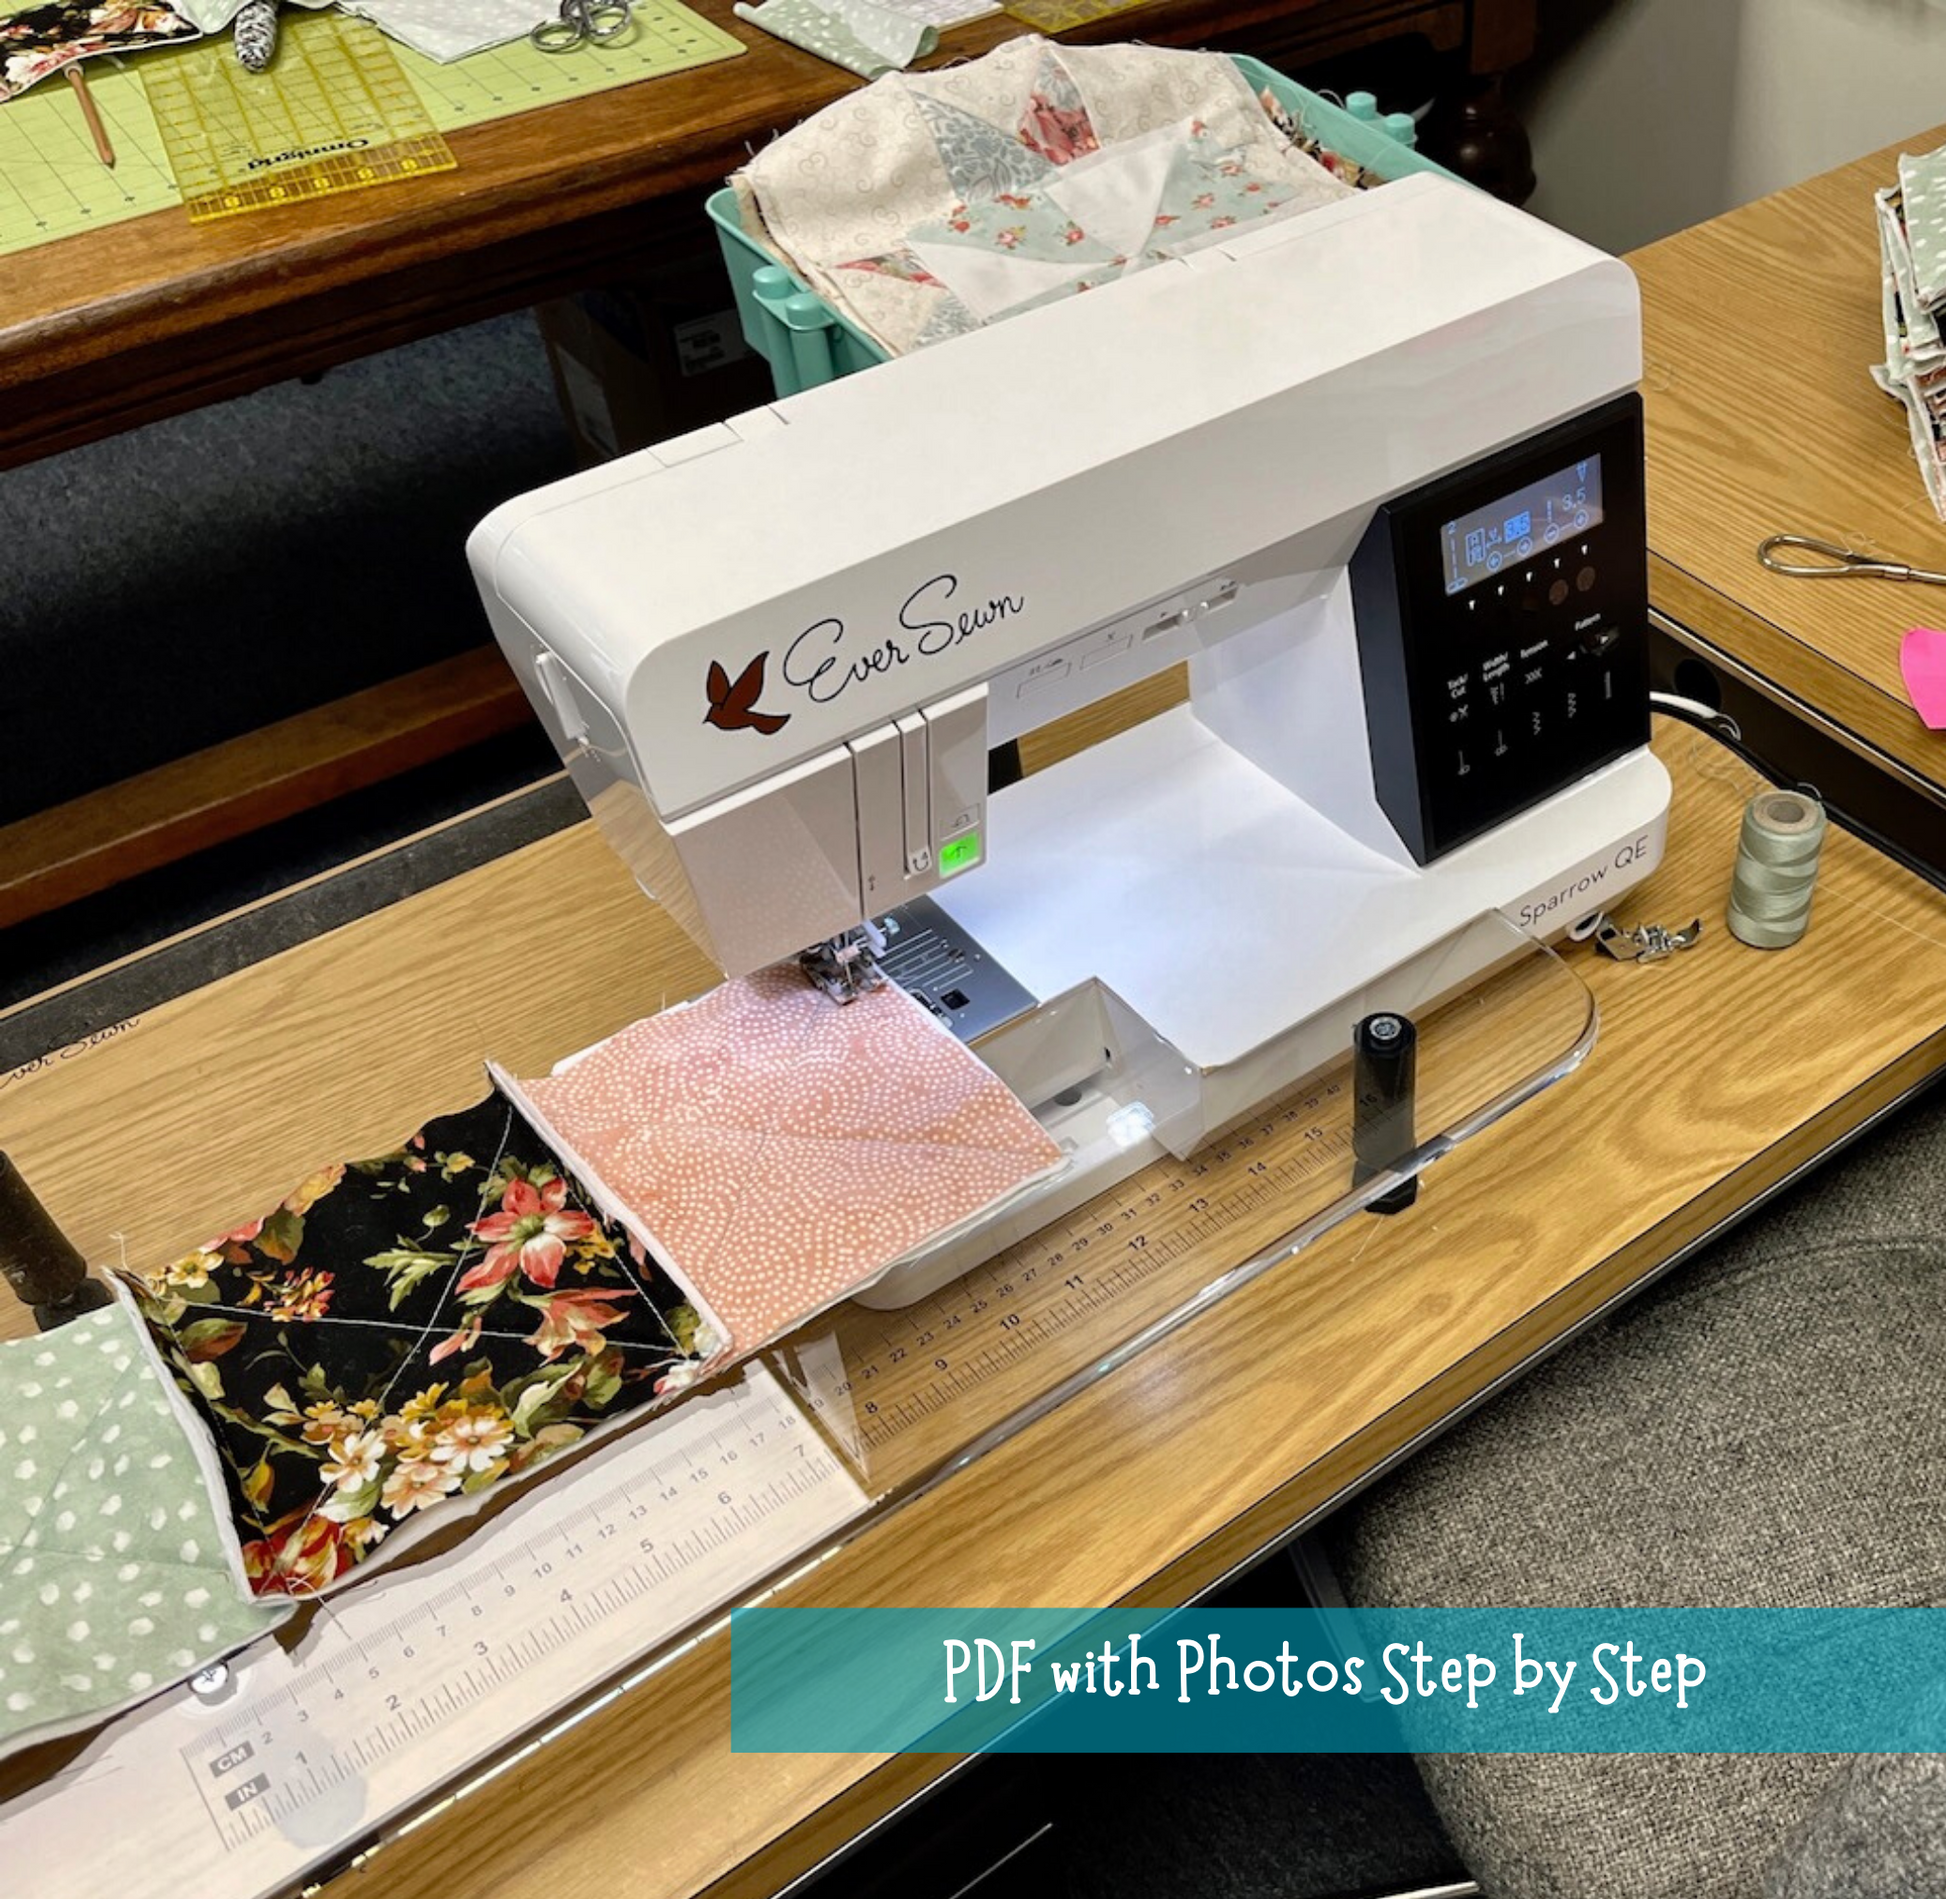 Product Reviews - Sewing & Quilting 